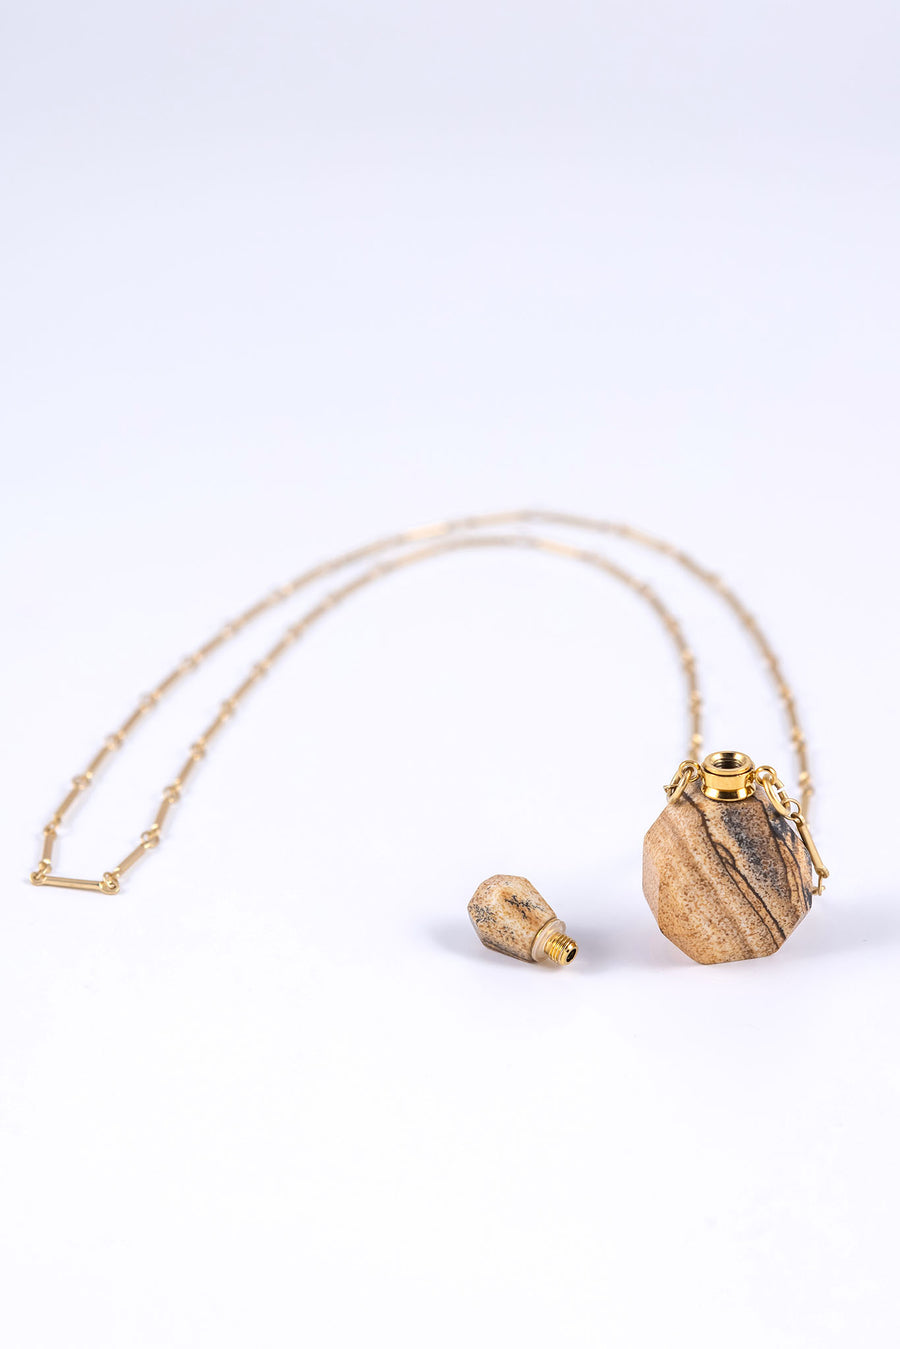 Essential oil necklace made from jasper with a screw top and long gold chain